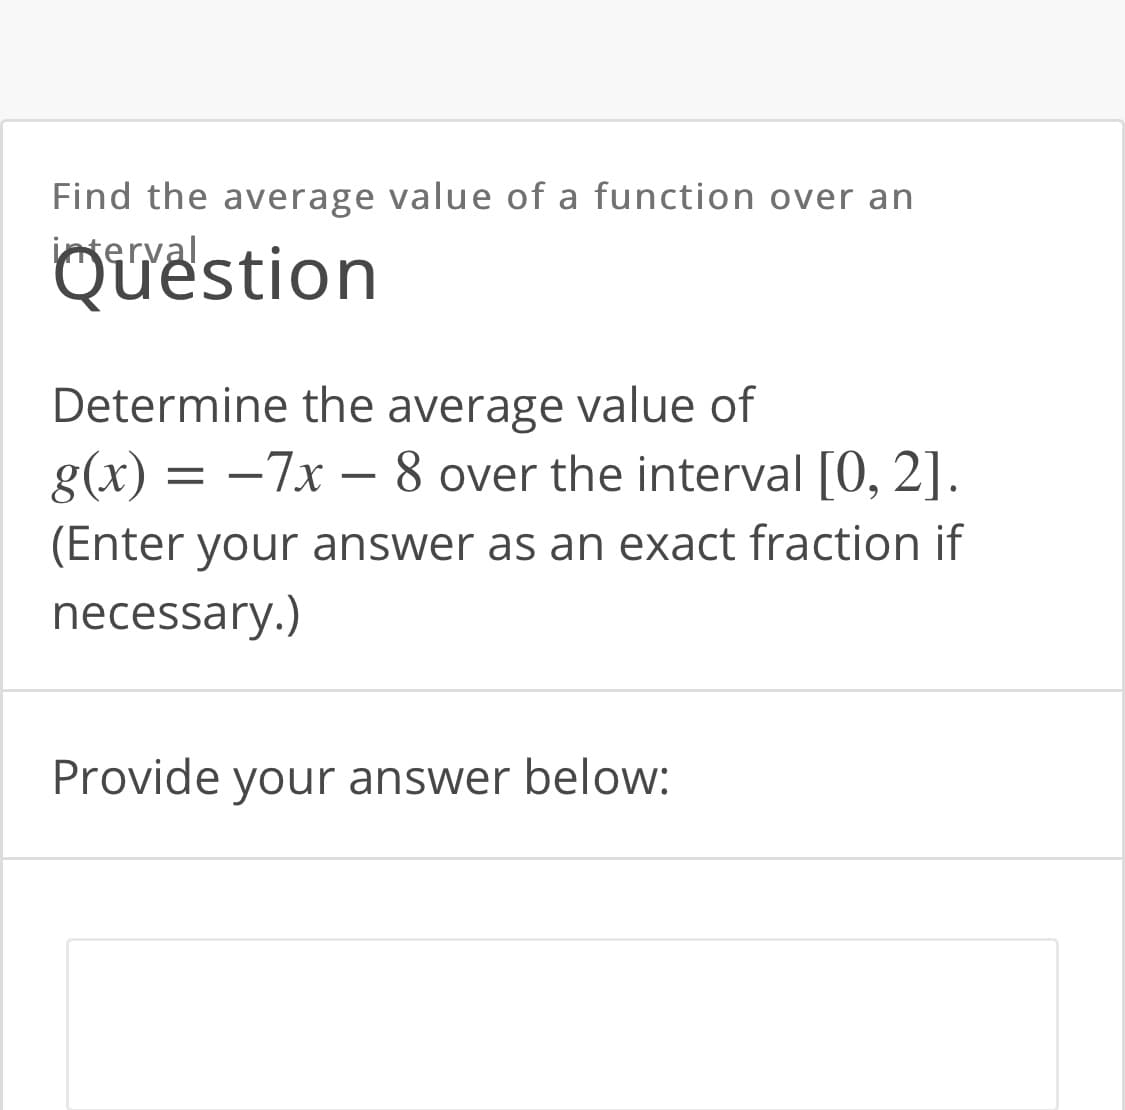 Find the average value of a function over an
iterval
Quëstion
Determine the average value of
g(x) = -7x – 8 over the interval [0, 2].
(Enter your answer as an exact fraction if
necessary.)
Provide your answer below:
